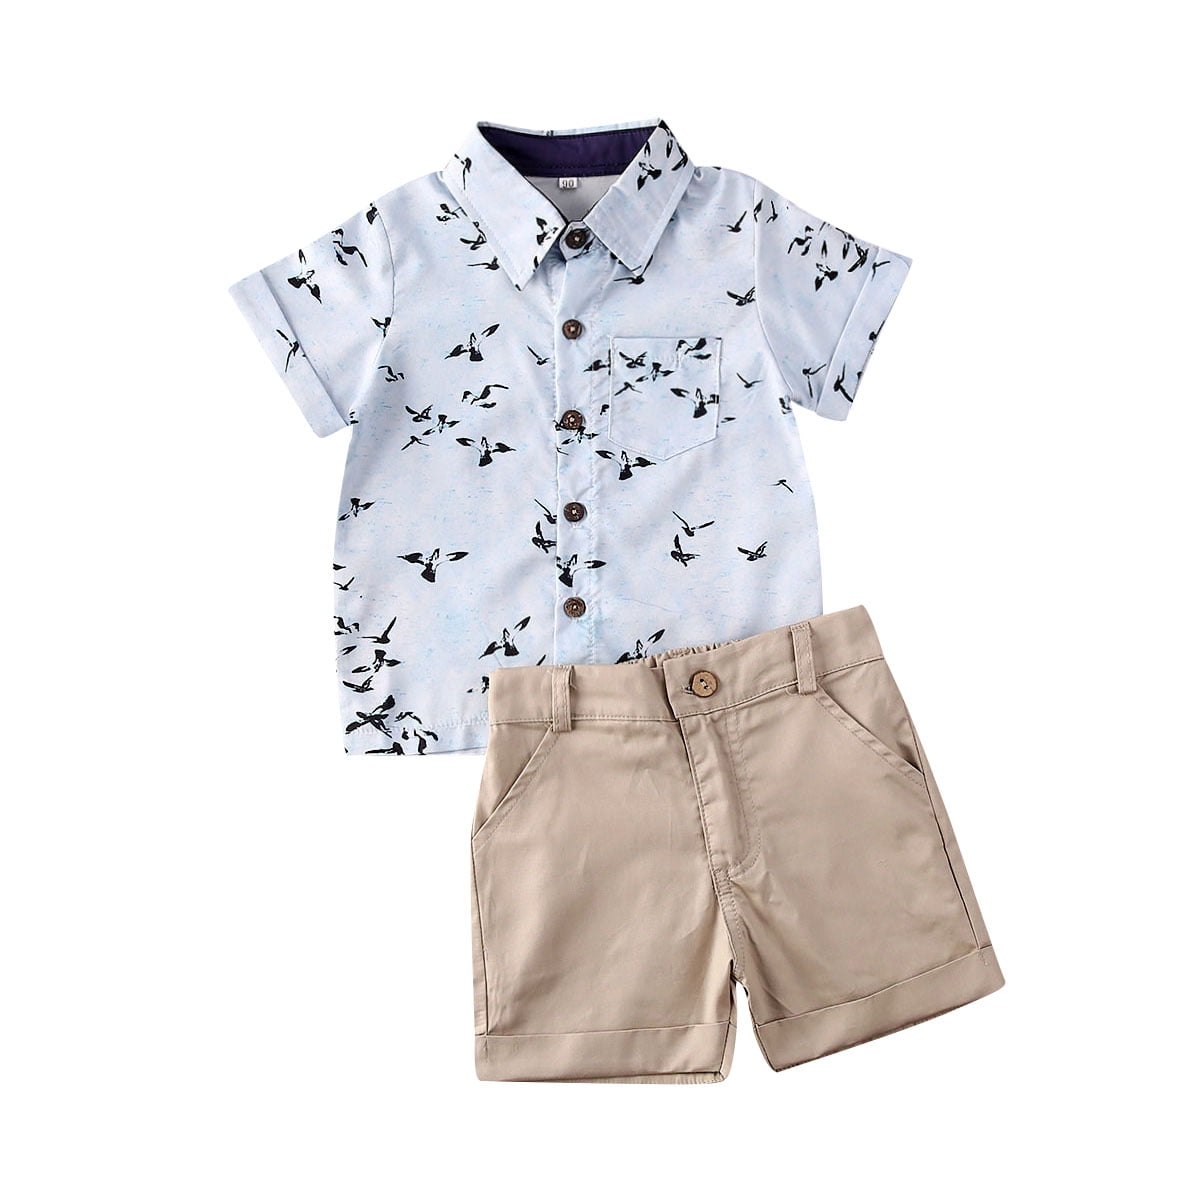 Details about  / NEW Fox Boys Button Shirt Bow Tie /& Shorts Outfit Set 2T 3T 4T 5T 6